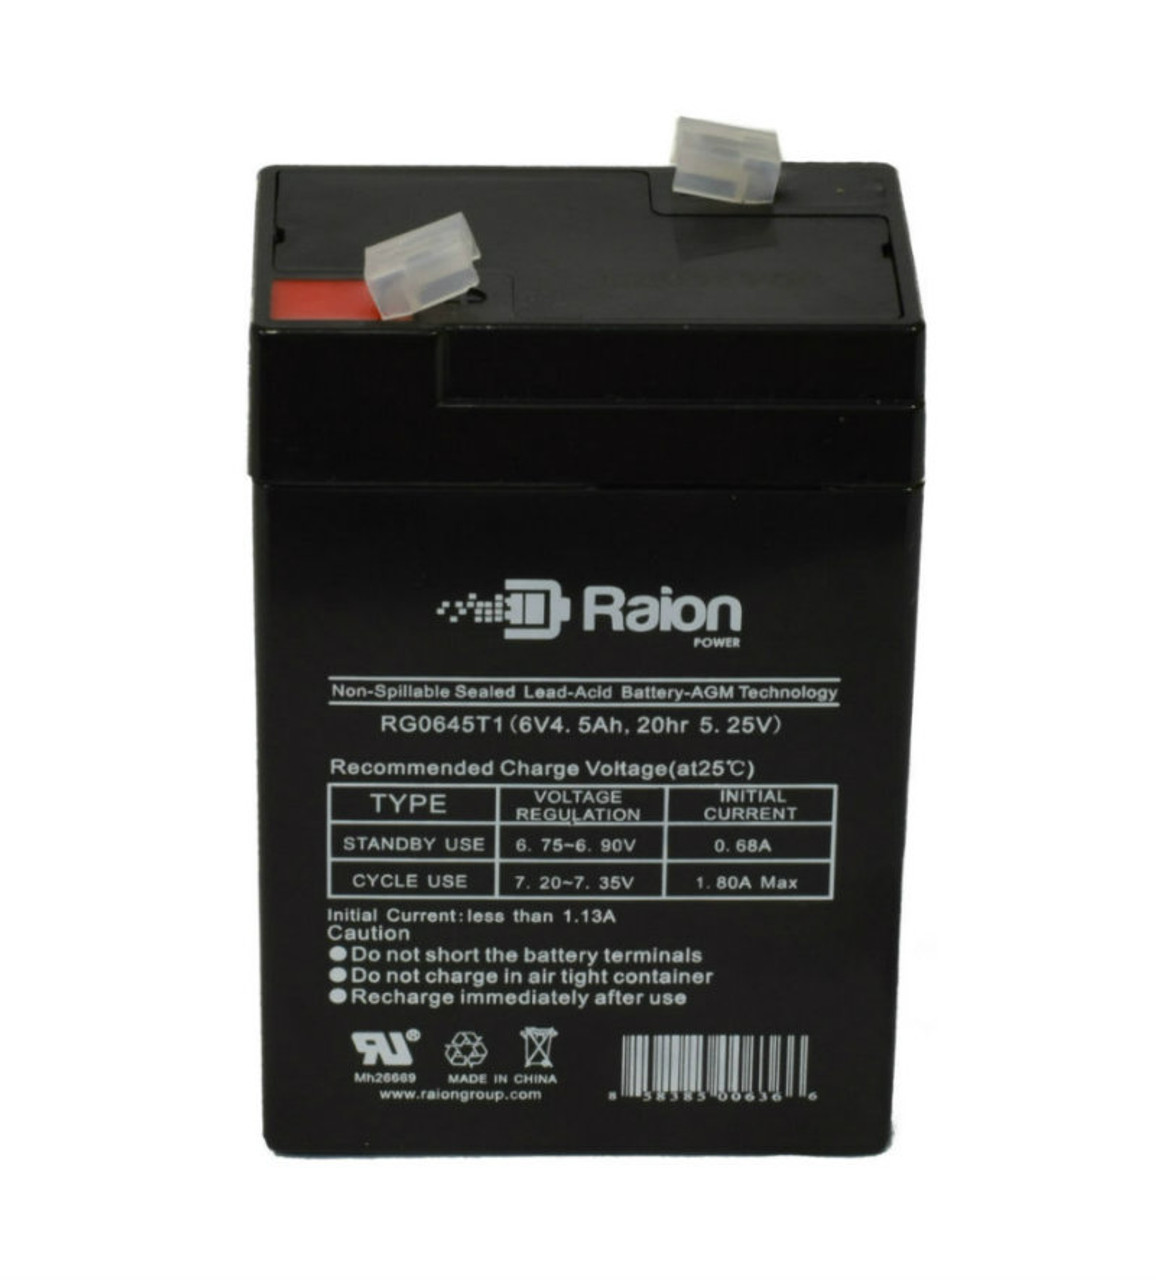 Raion Power RG0645T1 Replacement Battery Cartridge for Expocell P206-50